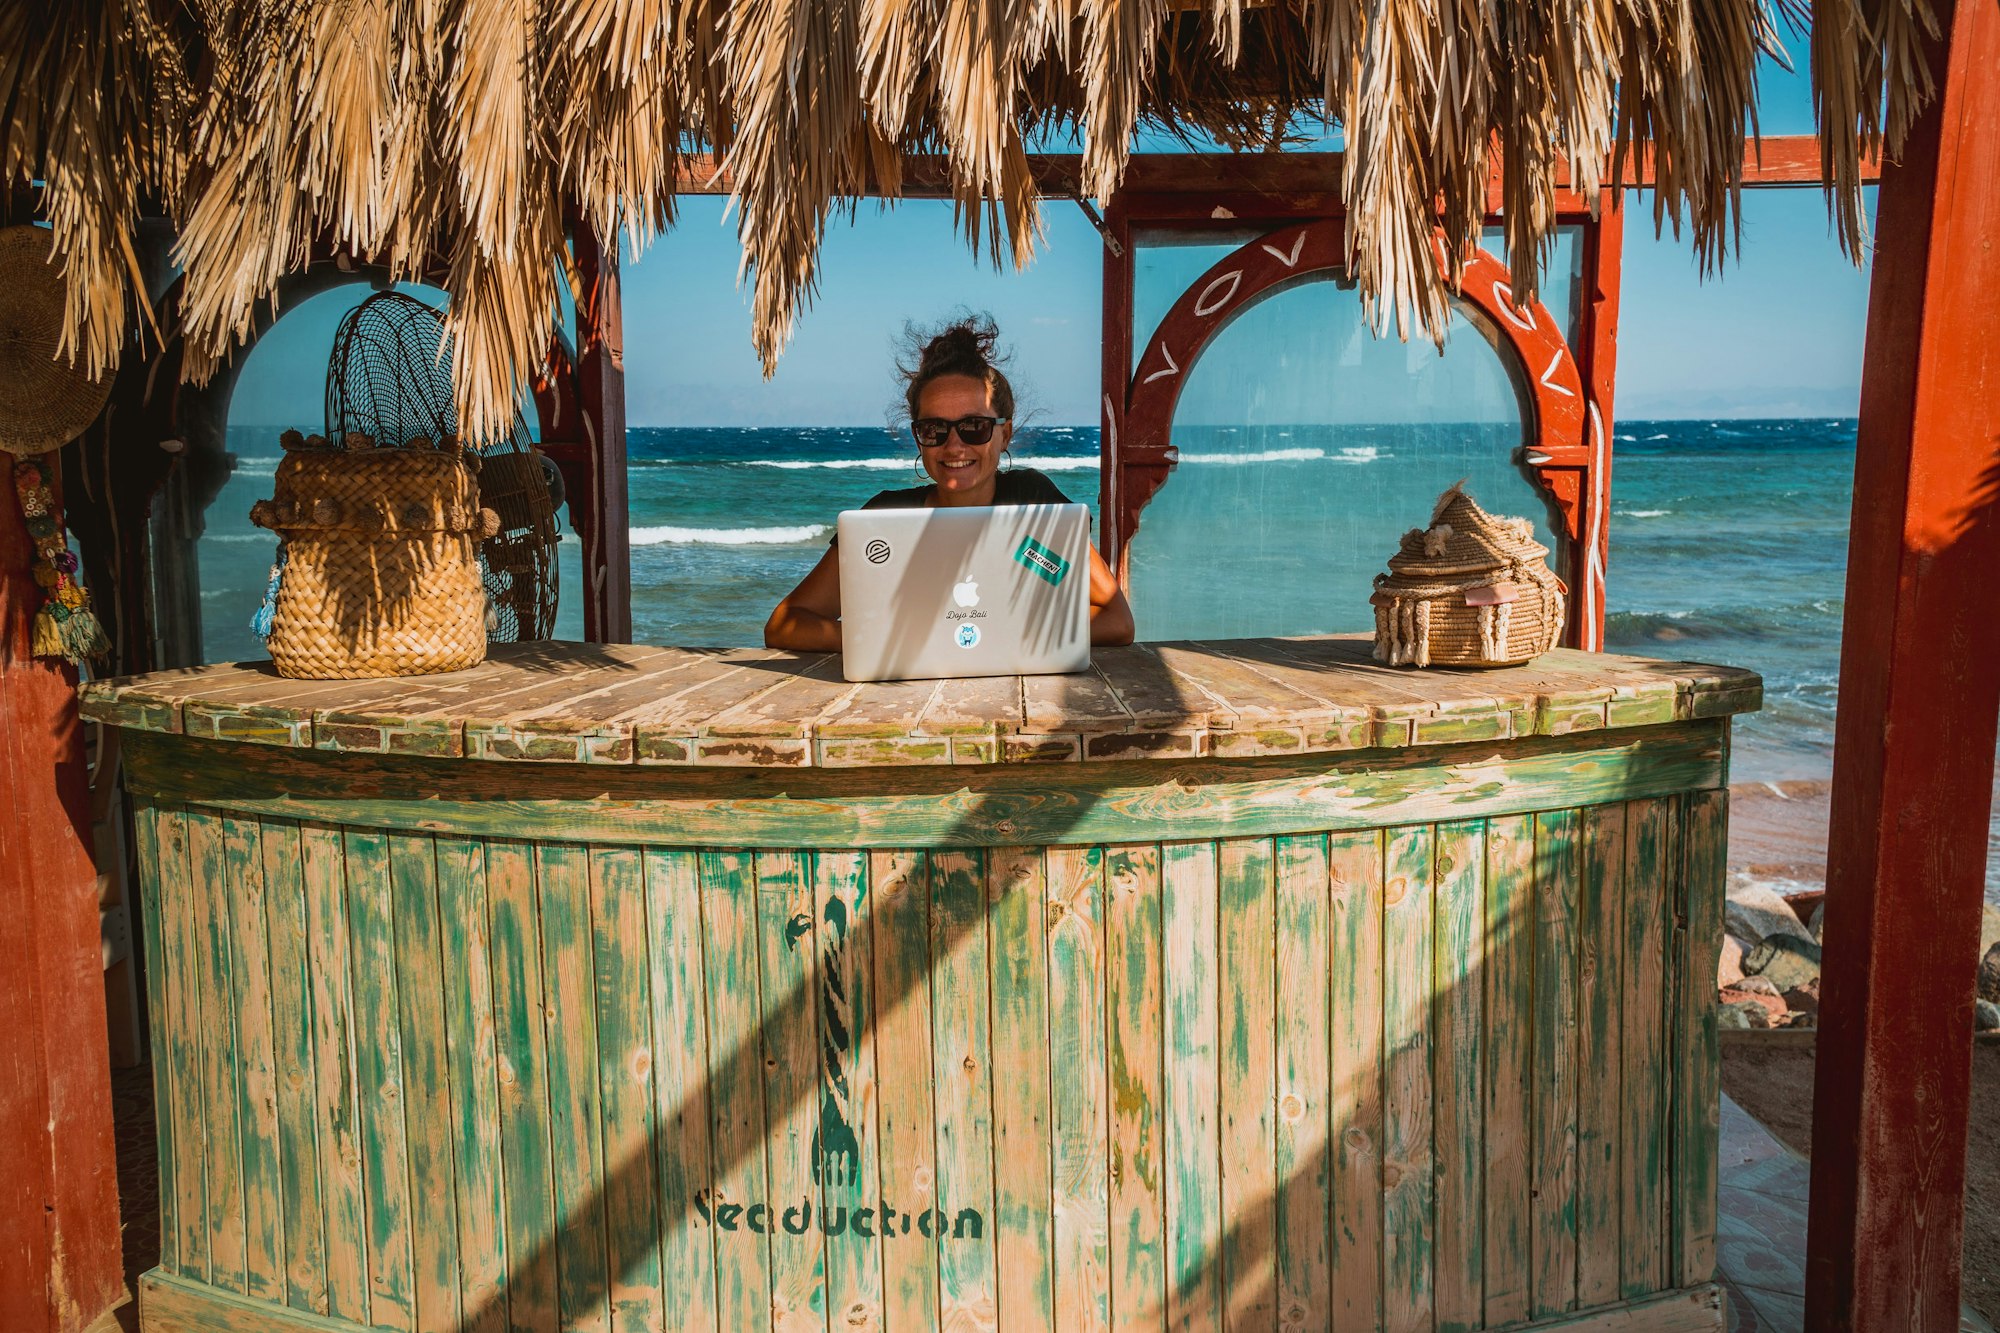 How to Become a Digital Nomad? Pros, Cons & Common Remote Jobs